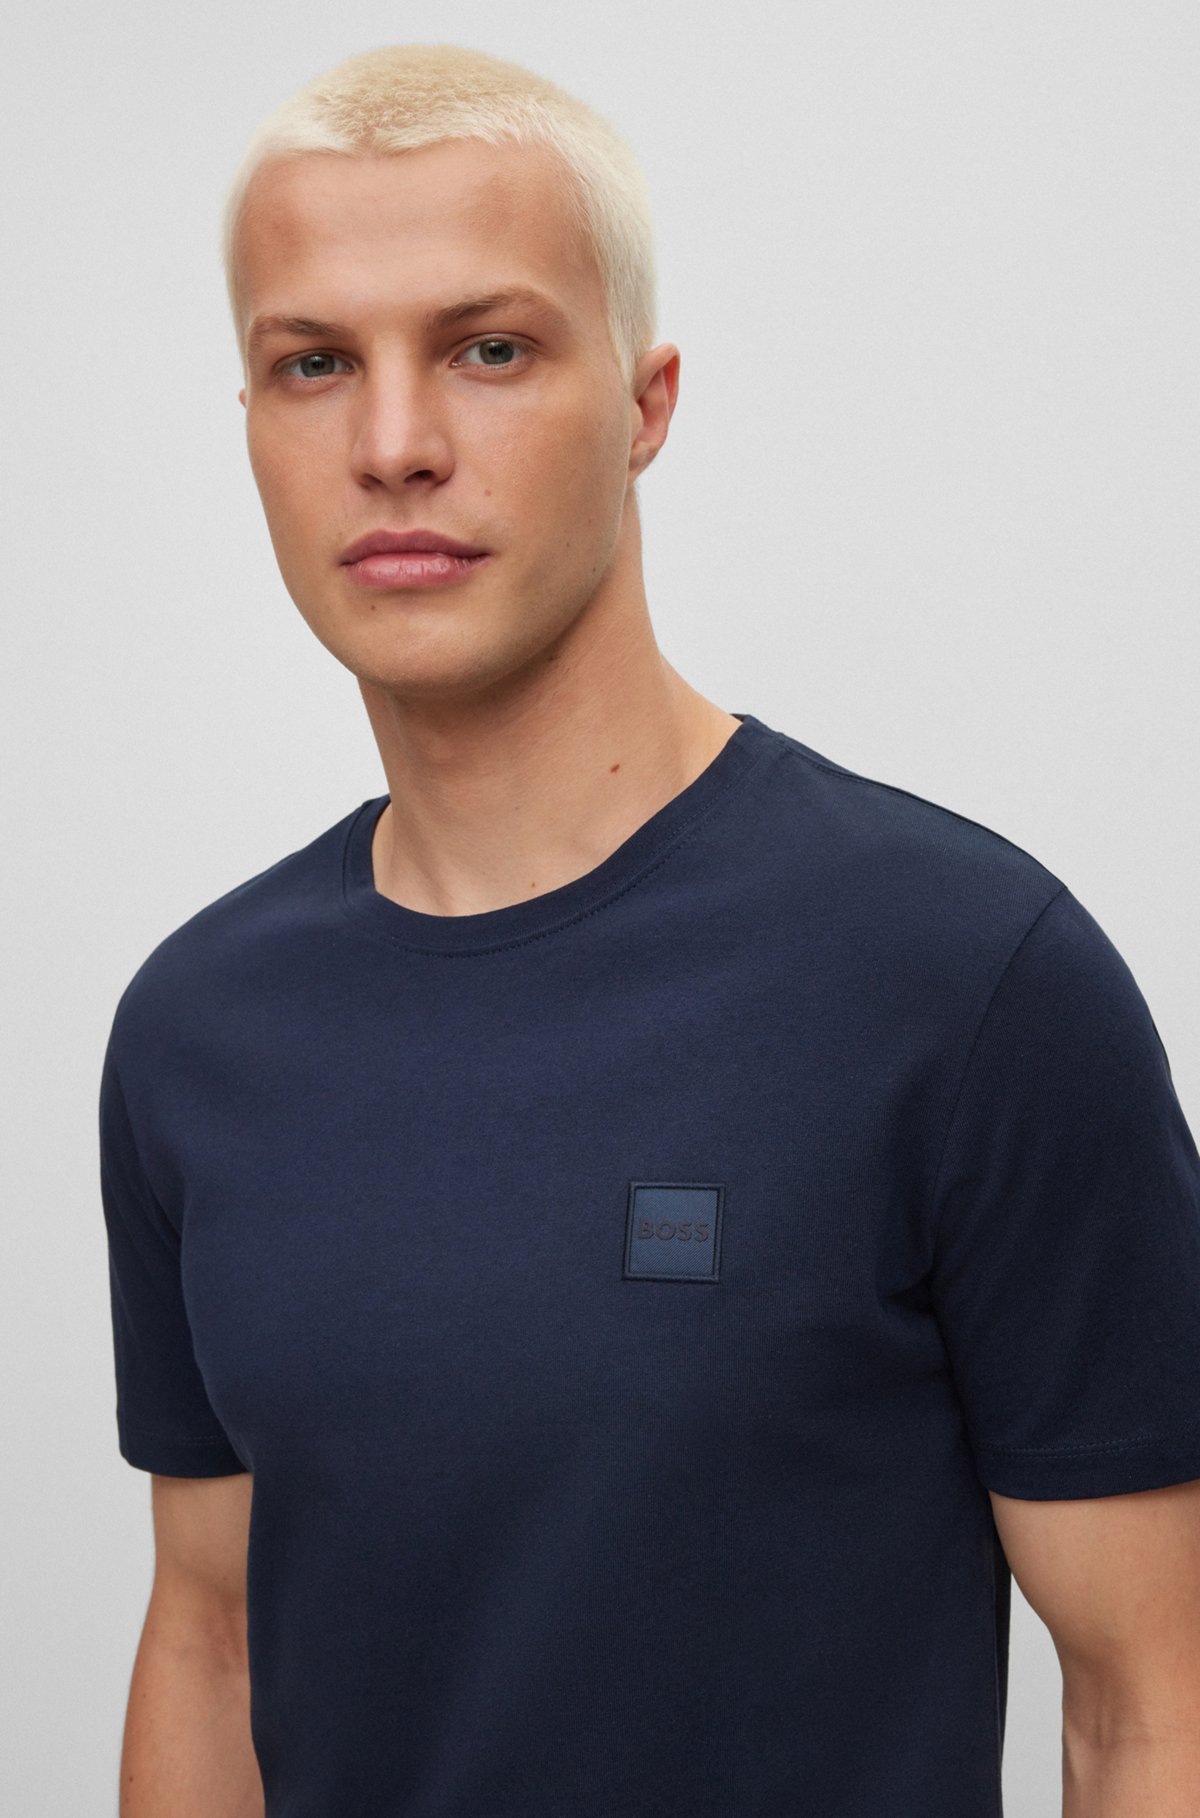 Boss - Relaxed-Fit T-Shirt In Cotton Jersey With Logo Patch